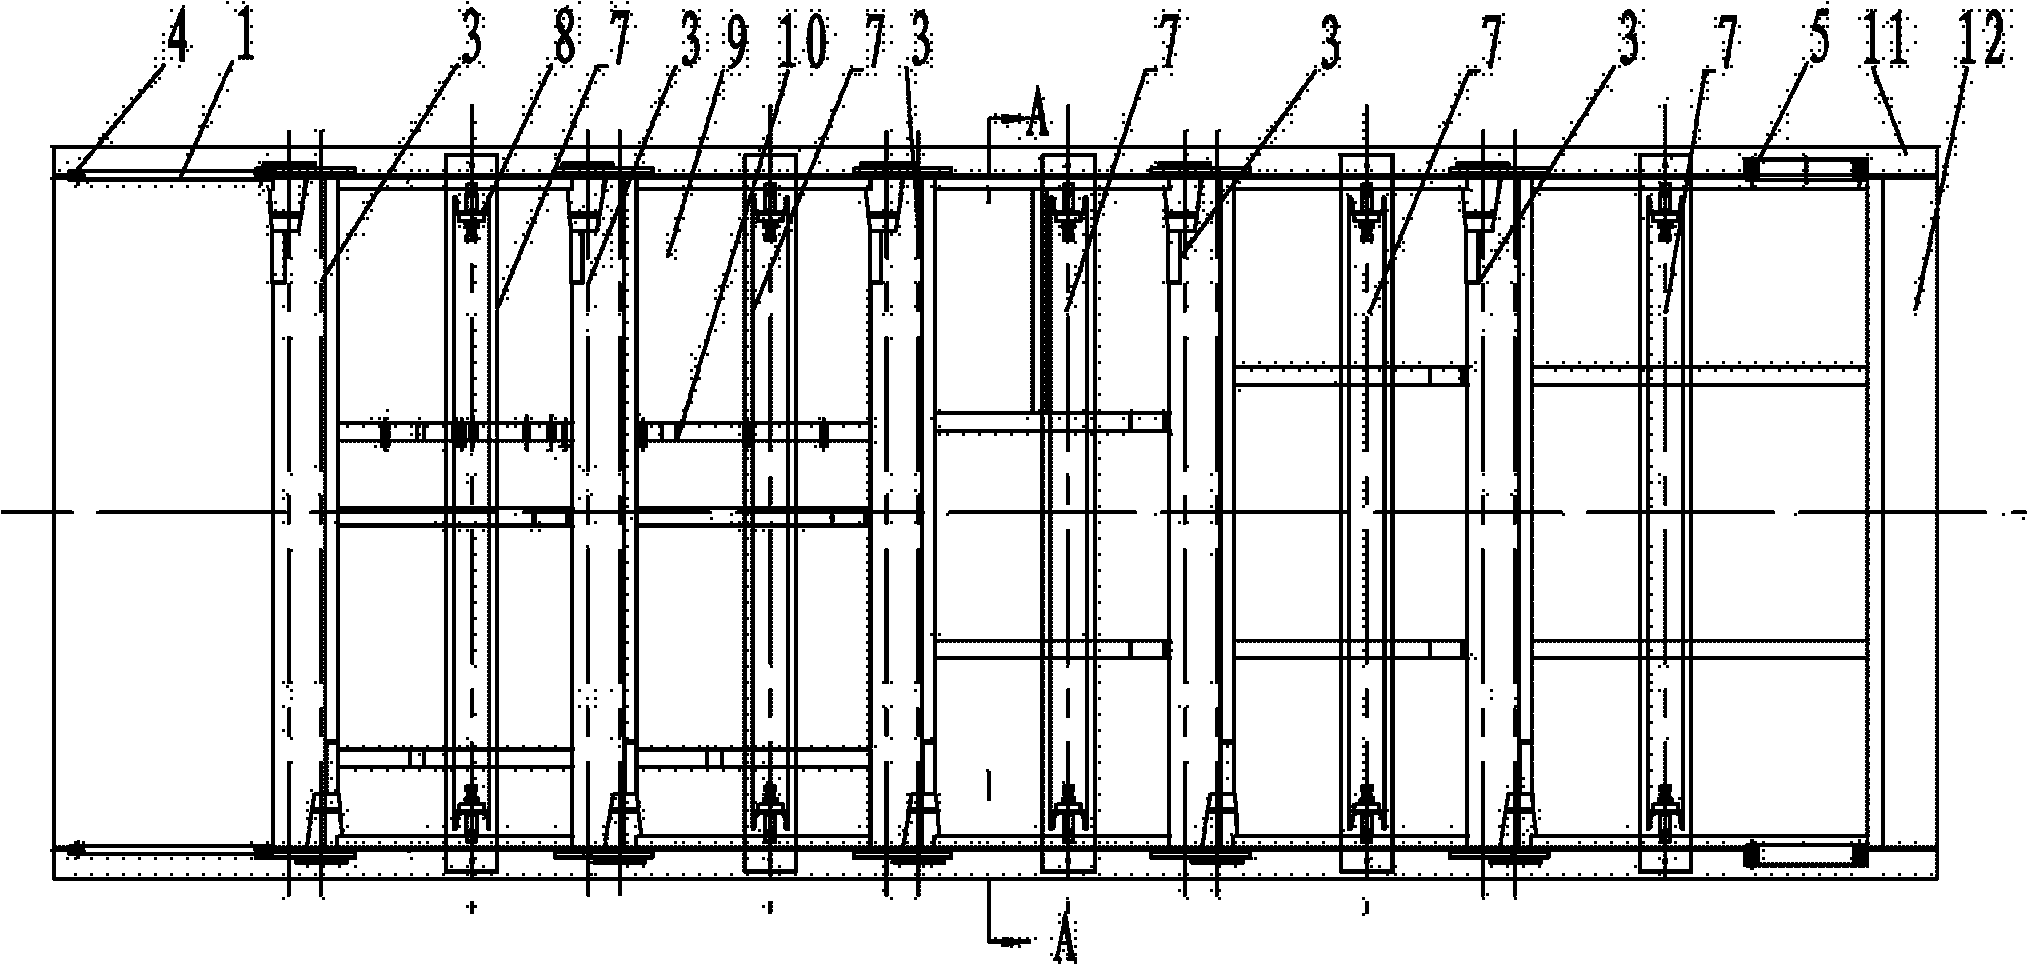 Assembly welding method of chassis assembly and assembly welding tooling clamping devices special for same